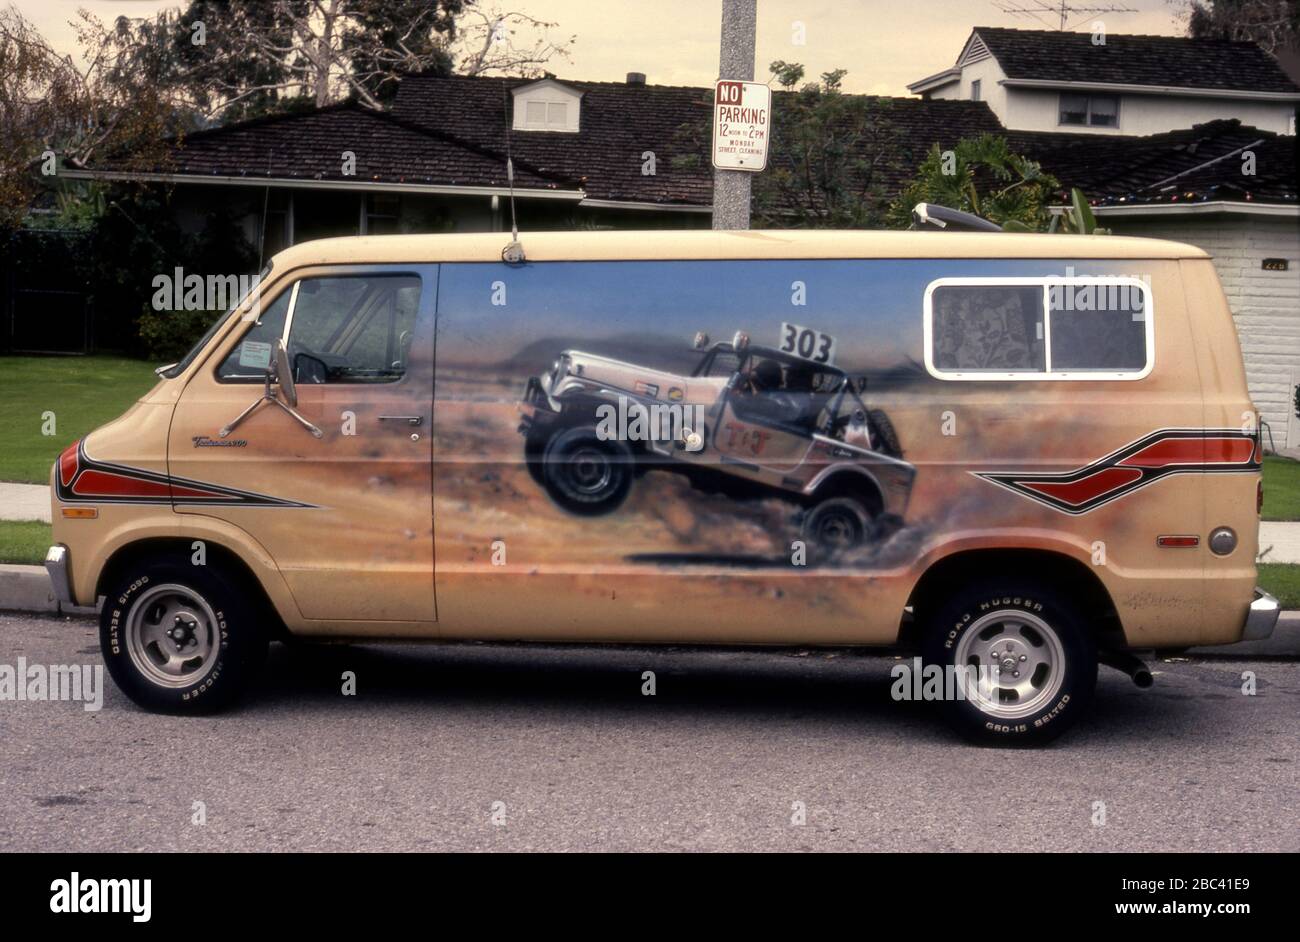 1970s era custom van with painting of a Jeep on the side in Los Angeles, CA Stock Photo